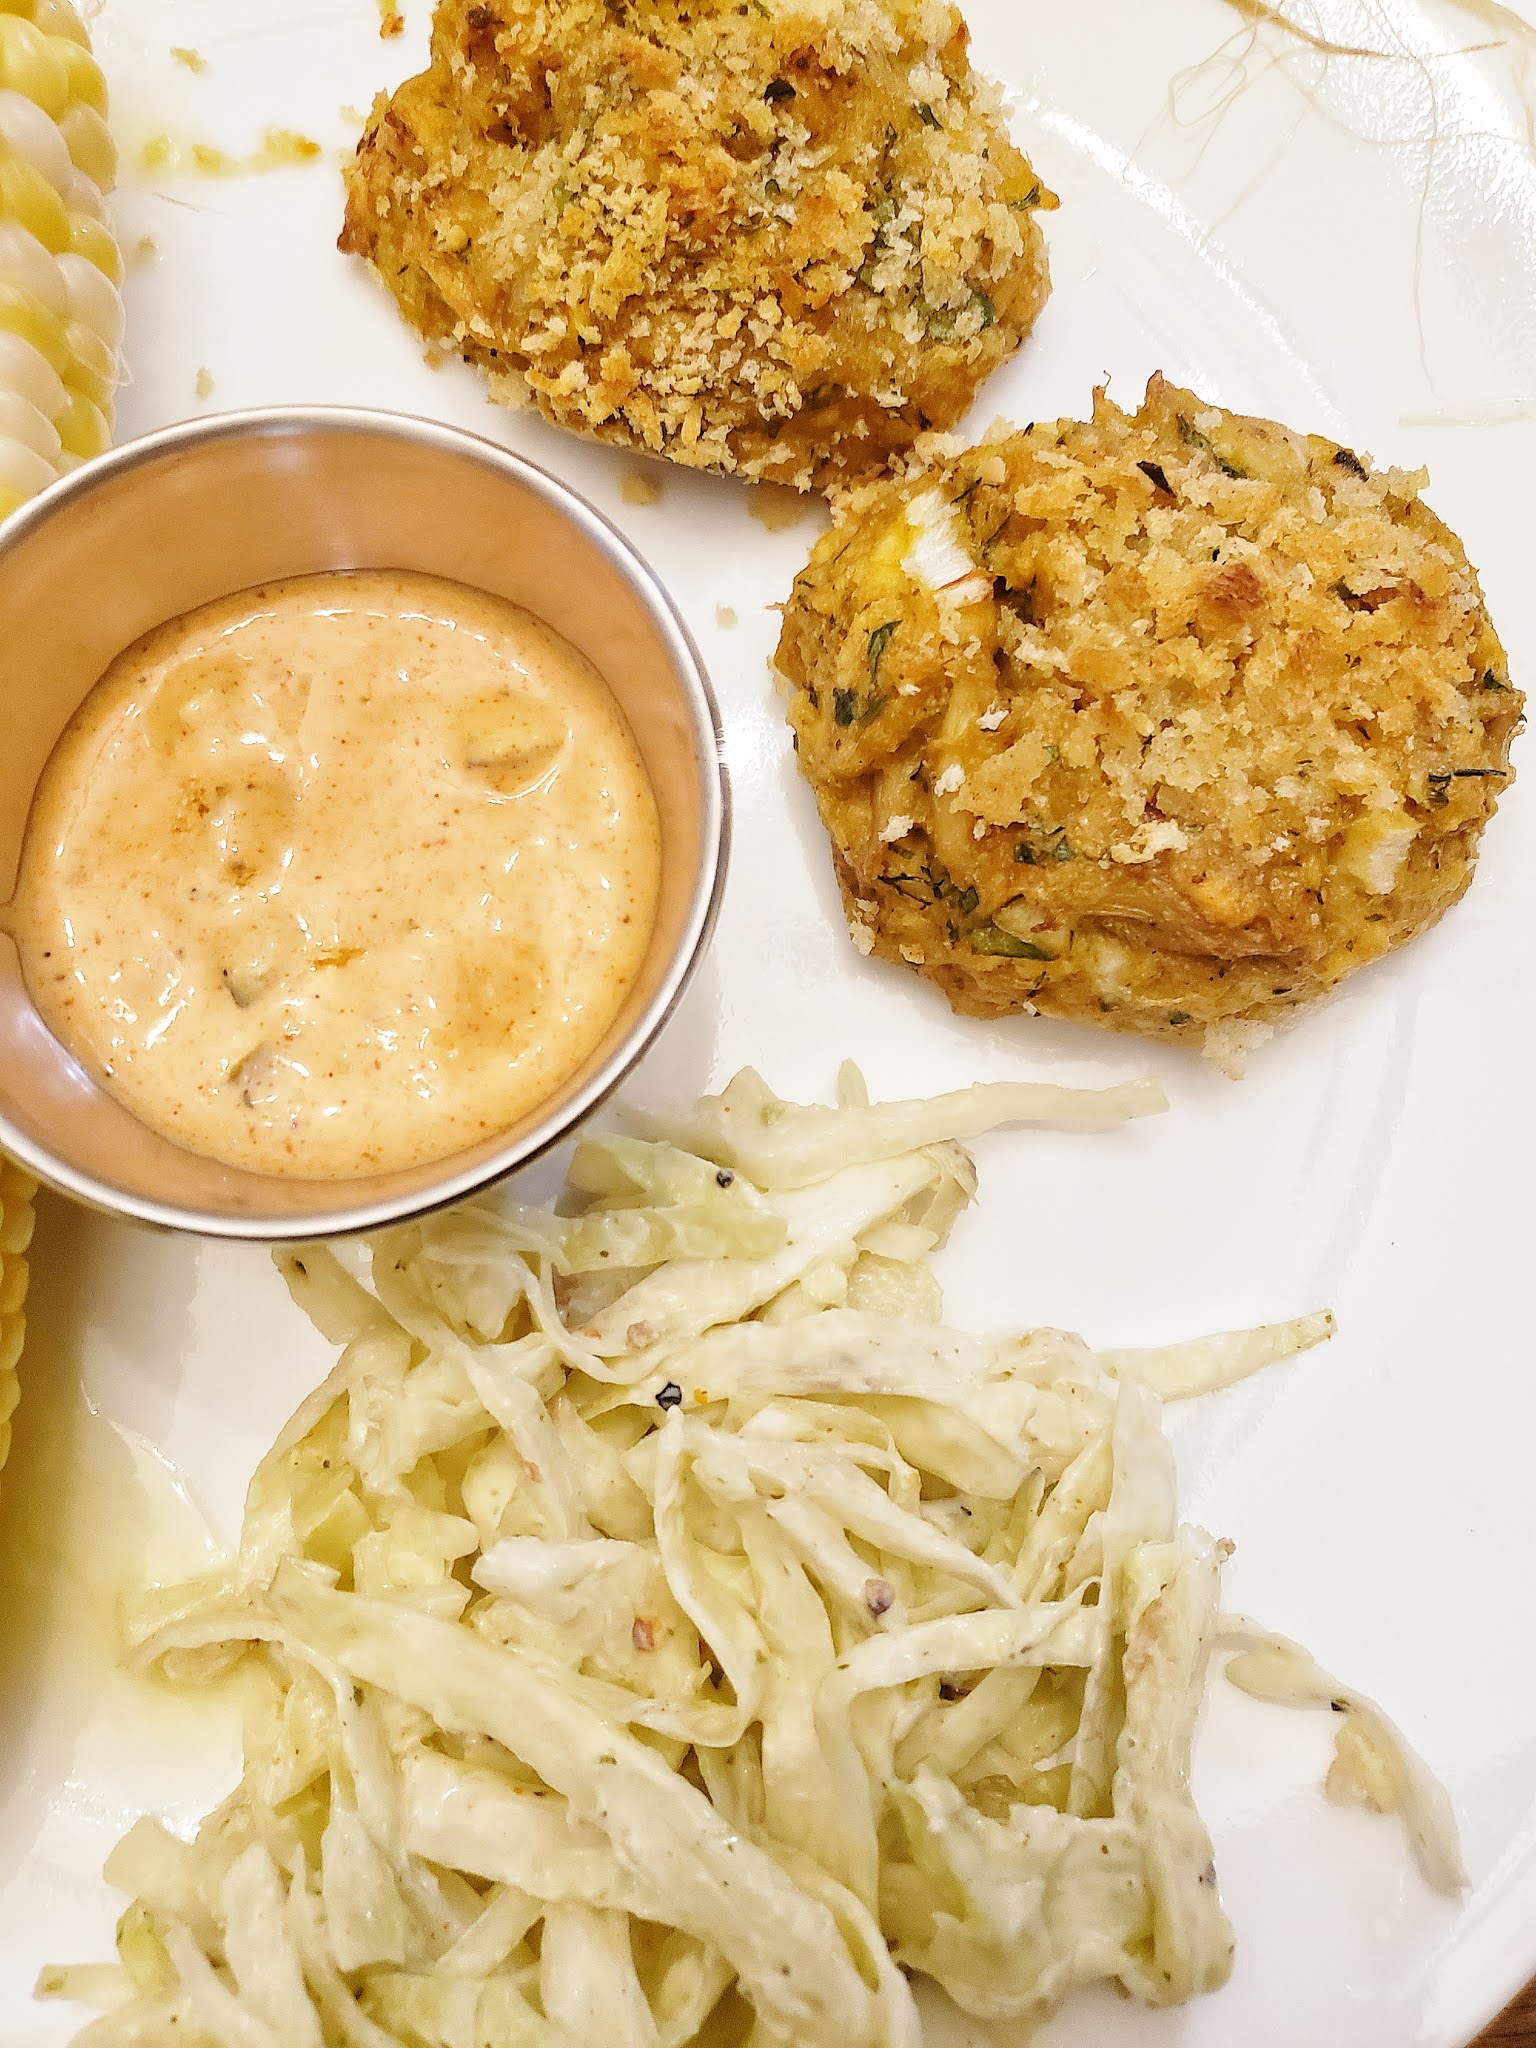 Maryland-Style Old Bay Crab Cakes - The Foodie Physician